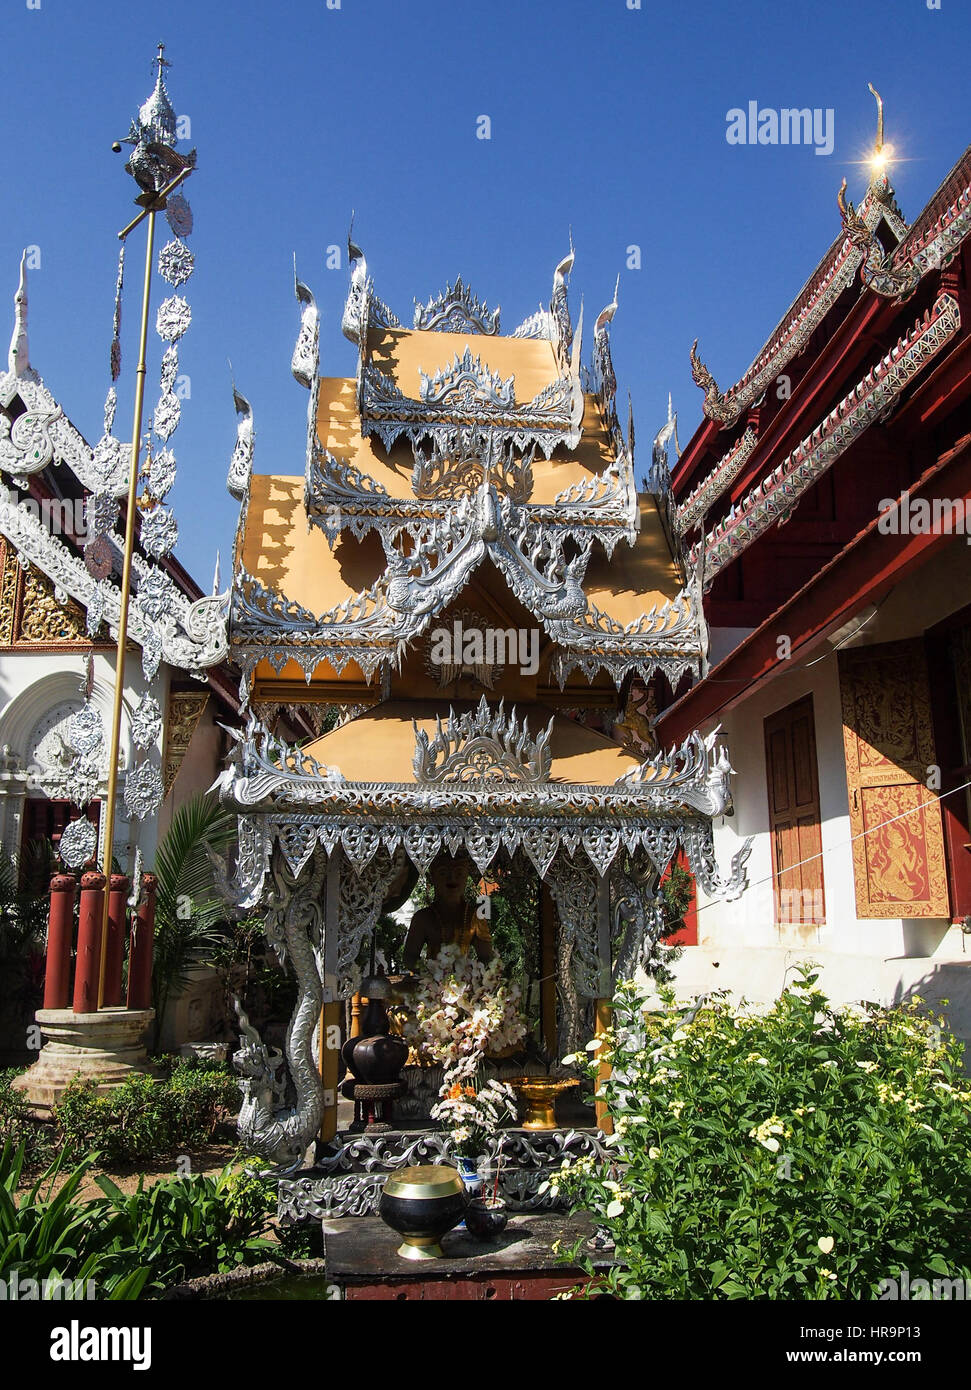 A highly decorated temple in Chiang Mai Thailand Stock Photo